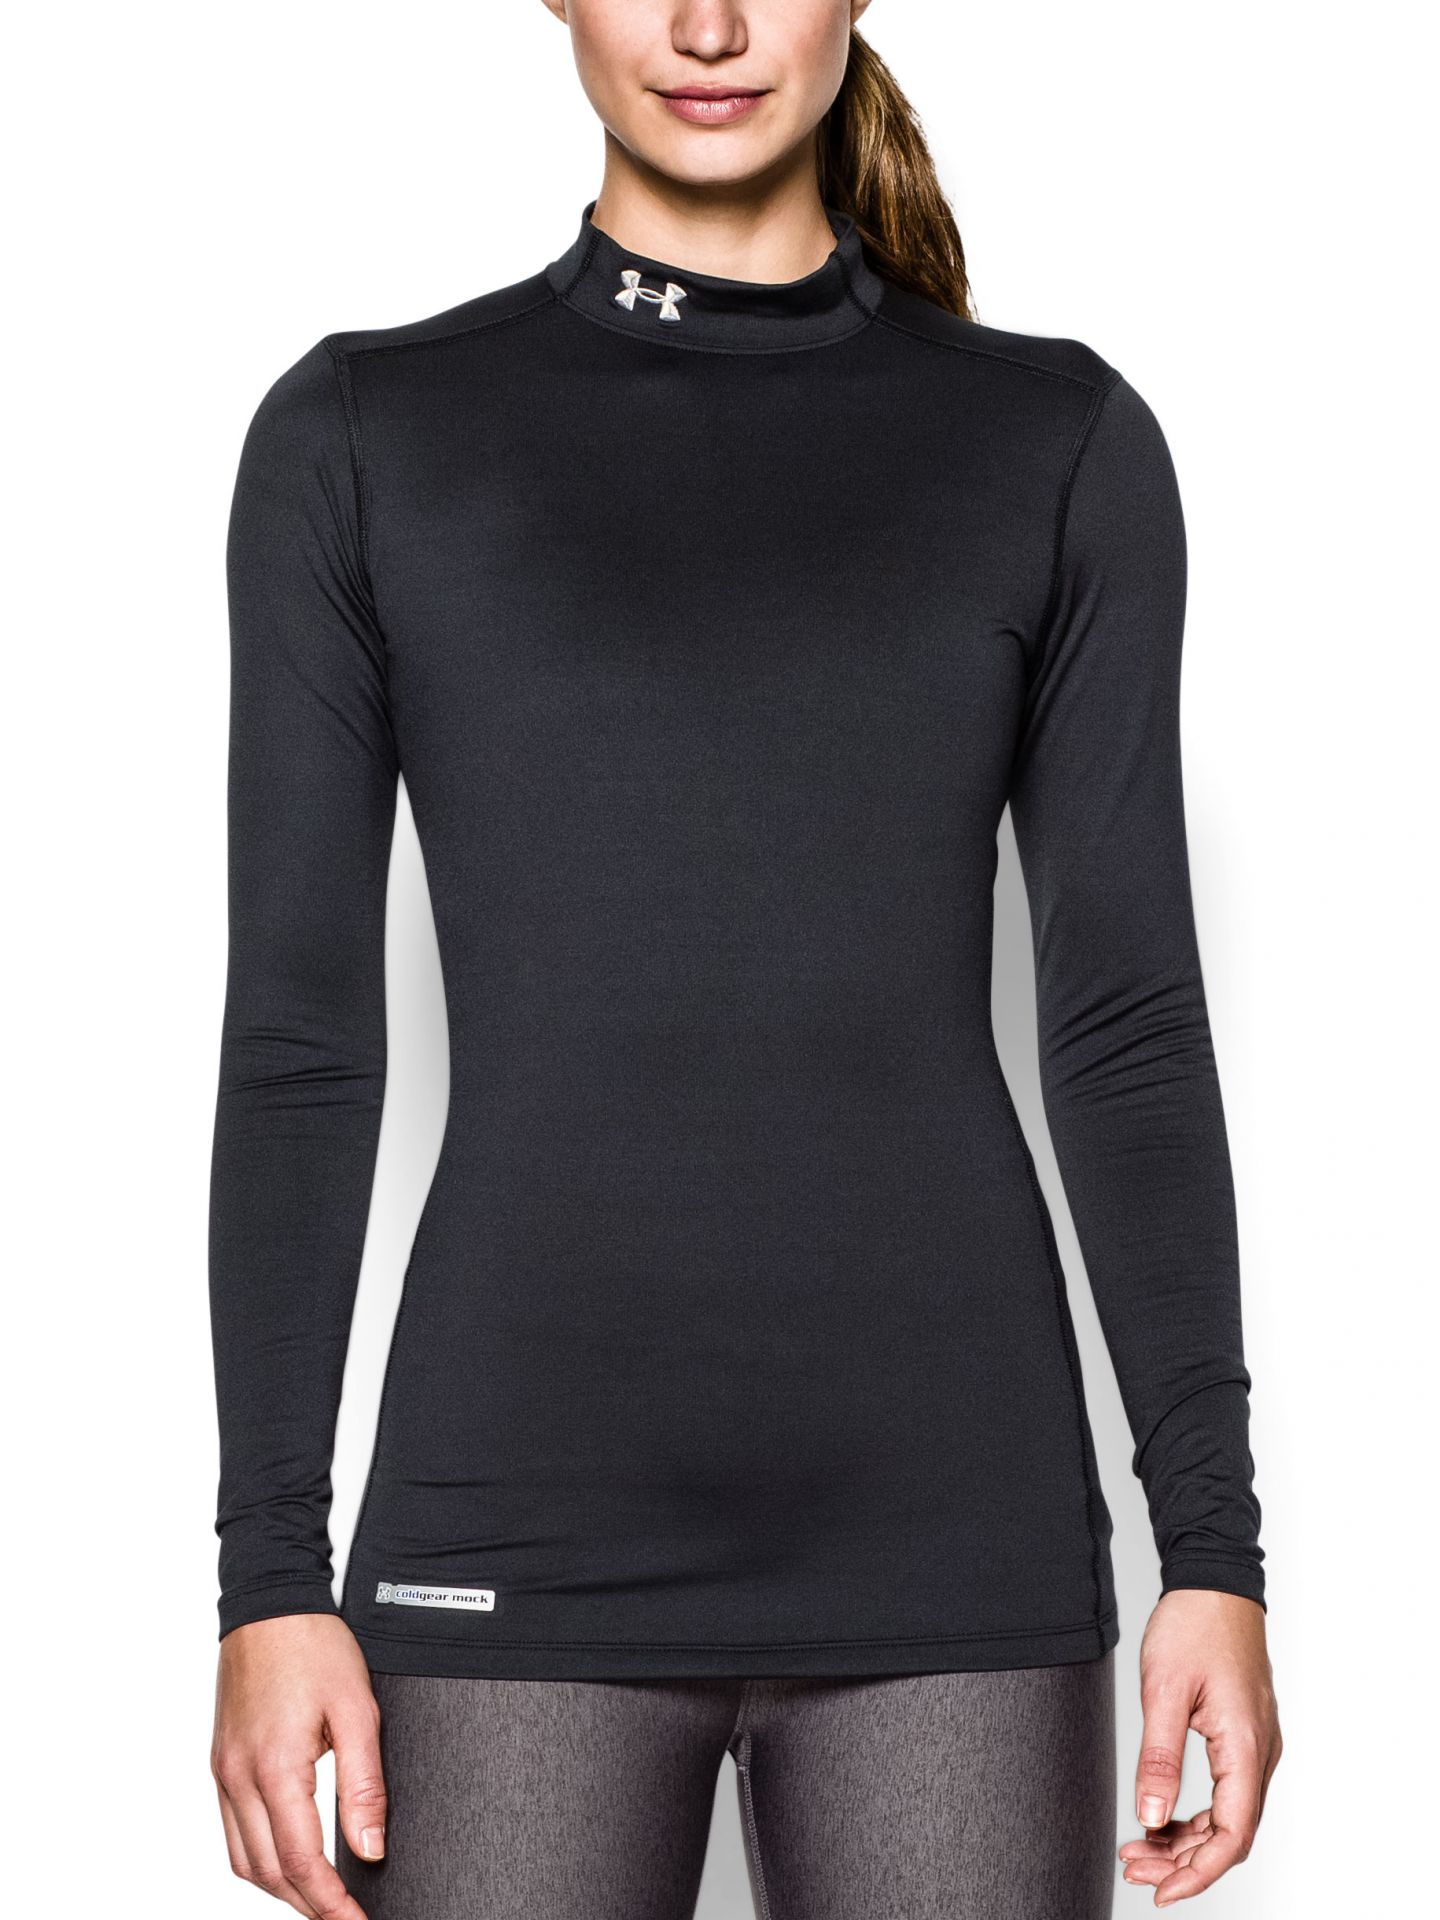 Under Armour Women's ColdGear Authentic Fitted Mock 1215968 | eBay